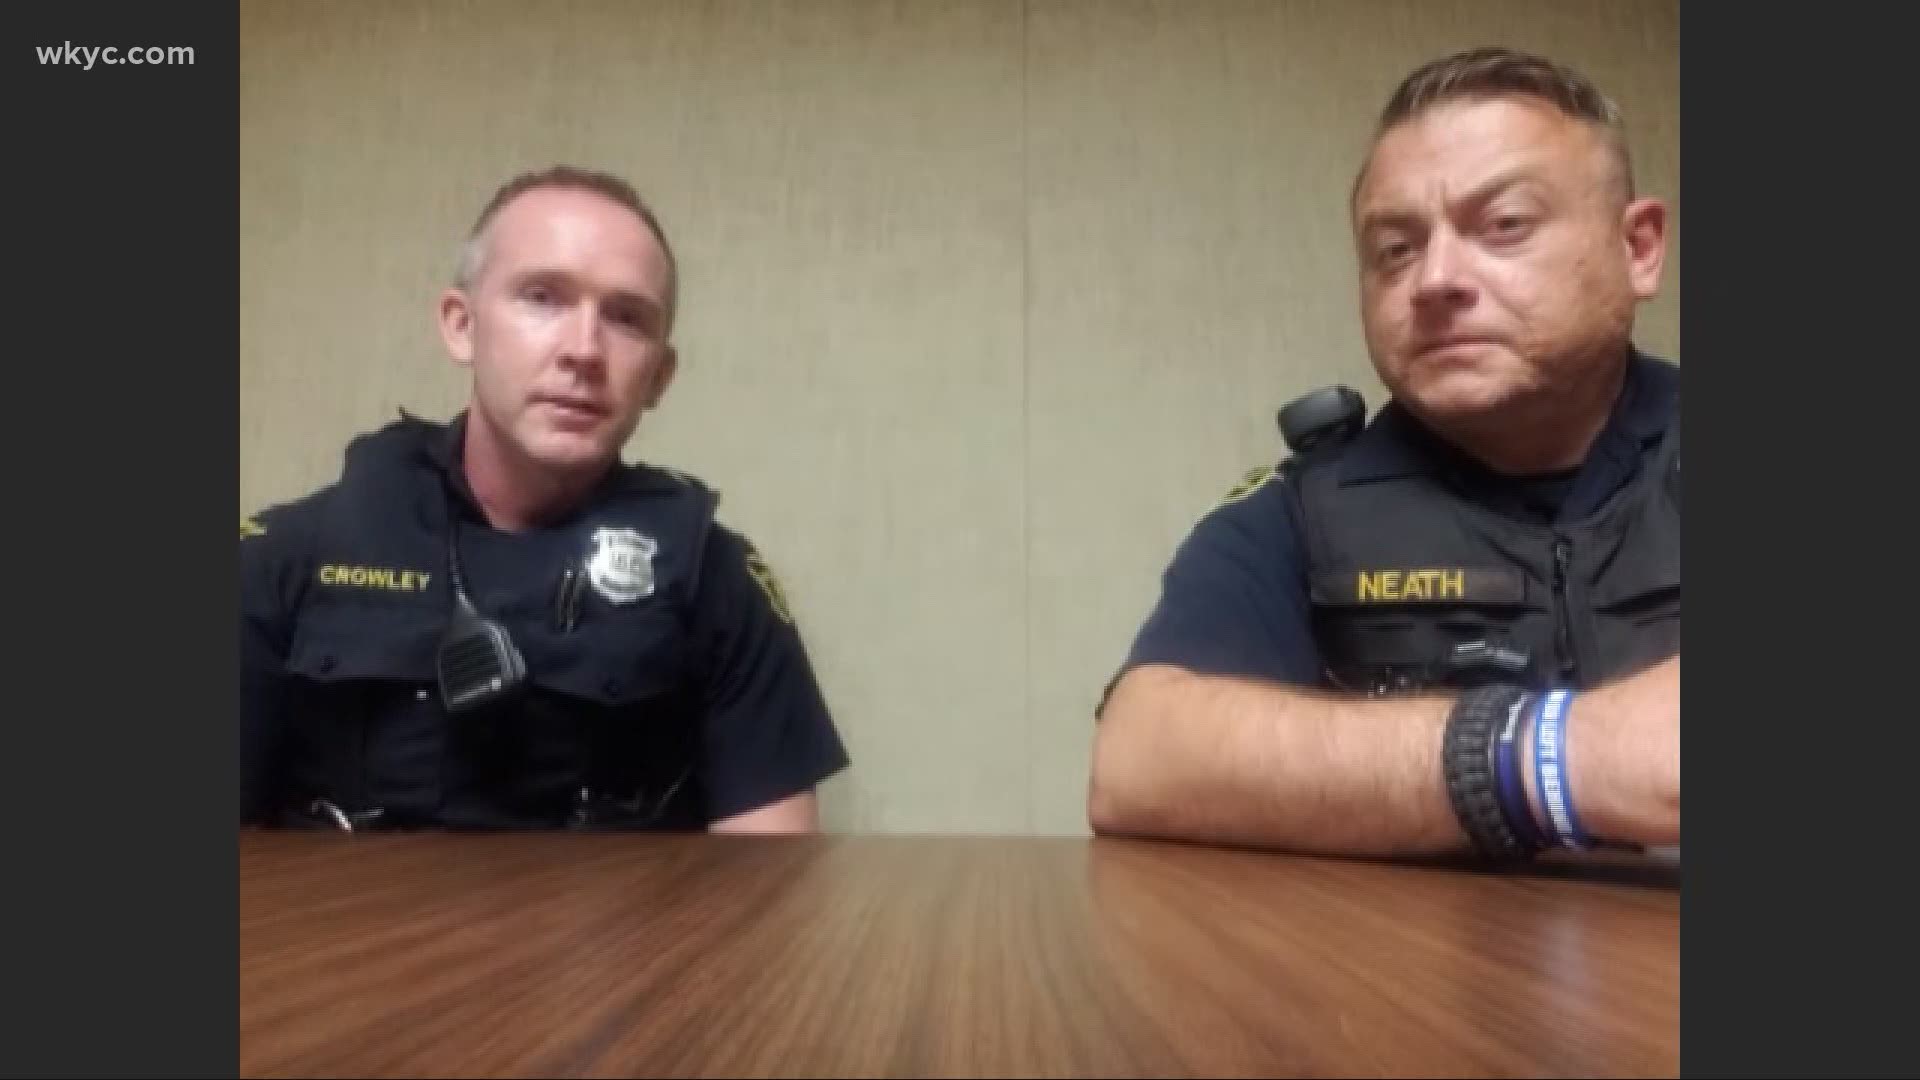 A pair of Willoughby police officers jumped into action and saved a 15 month-old boy after he started choking on an apple slice. Laura Caso reports.